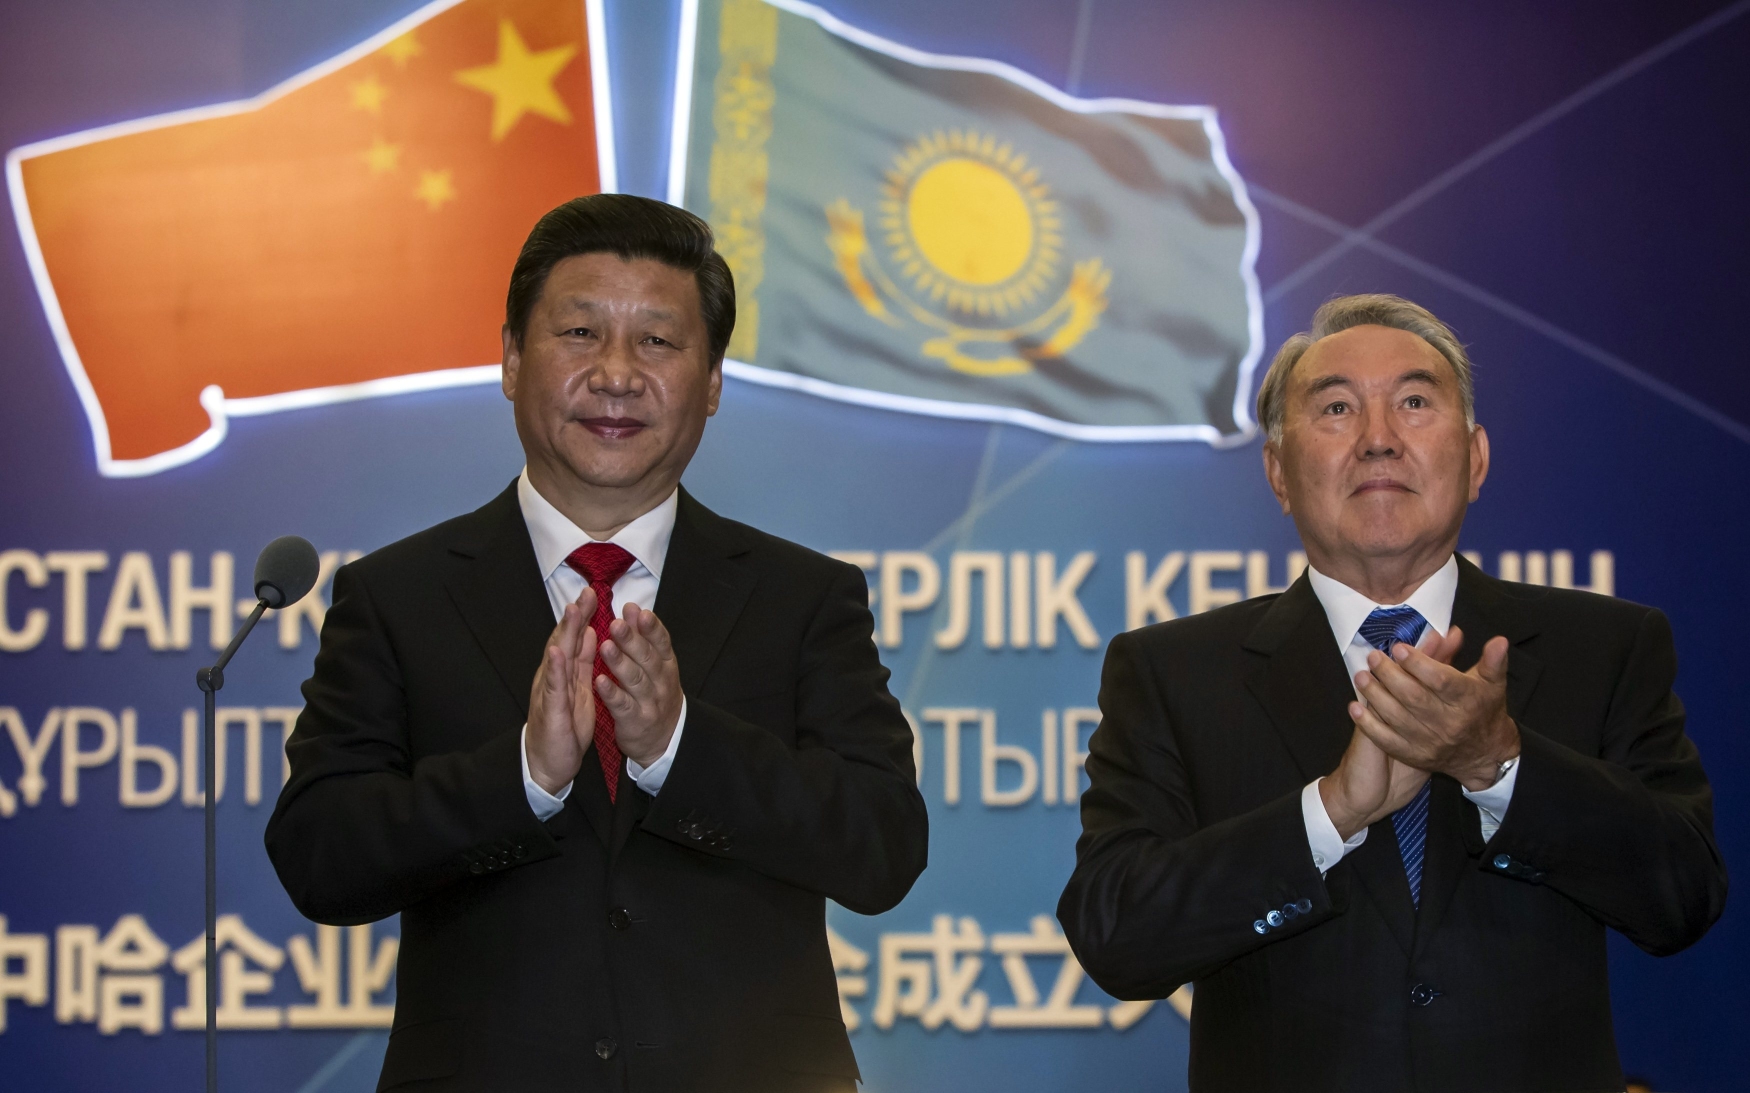 Kazakhstan's President Nursultan Nazarbayev (R) and his Chinese counterpart Xi Jinping applaud after a gas pipeline launching ceremony in Astana on Saturday. Photo: Reuters